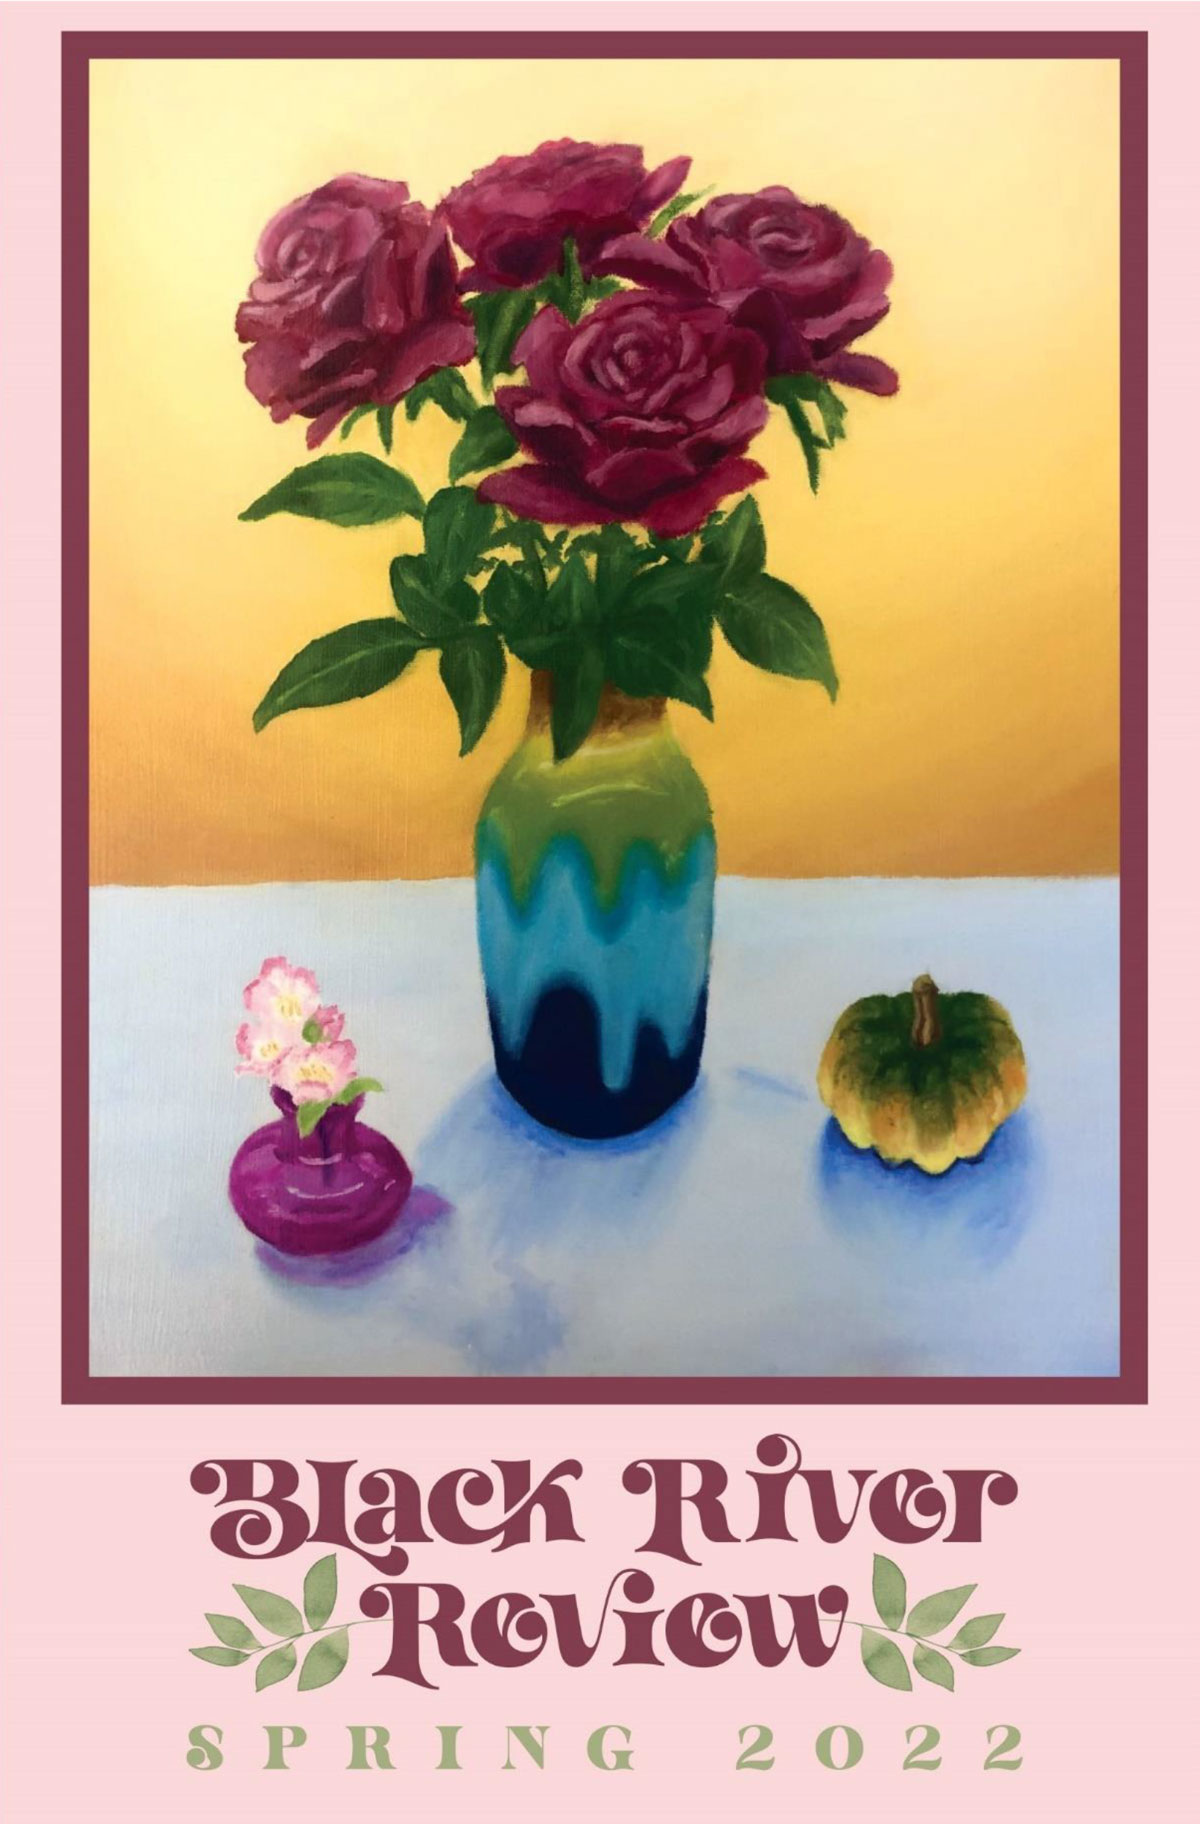 "Colors For All Seasons" is a still-life with a bunch of bright crimson roses in a colorful vase is at the center, with a small sprig of early pink blossoms on the left and autumn orange gourd on the right. The wall fades from gold to copper and the tablecloth is a cool light blue.